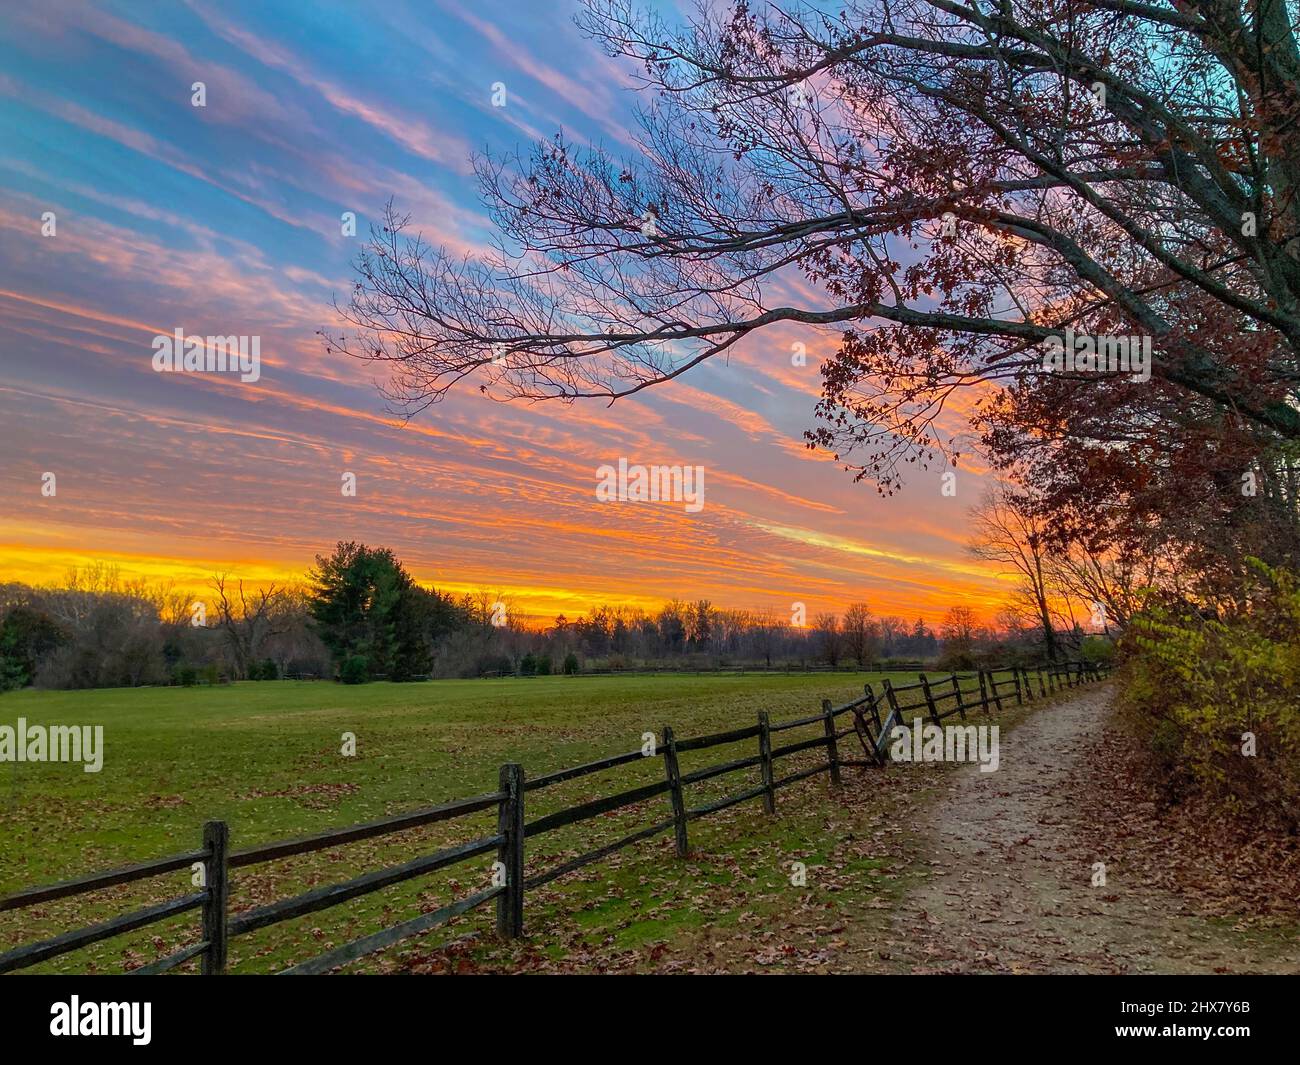 Dramatic sunset with field and fence, Pennsylvania, USA Stock Photo